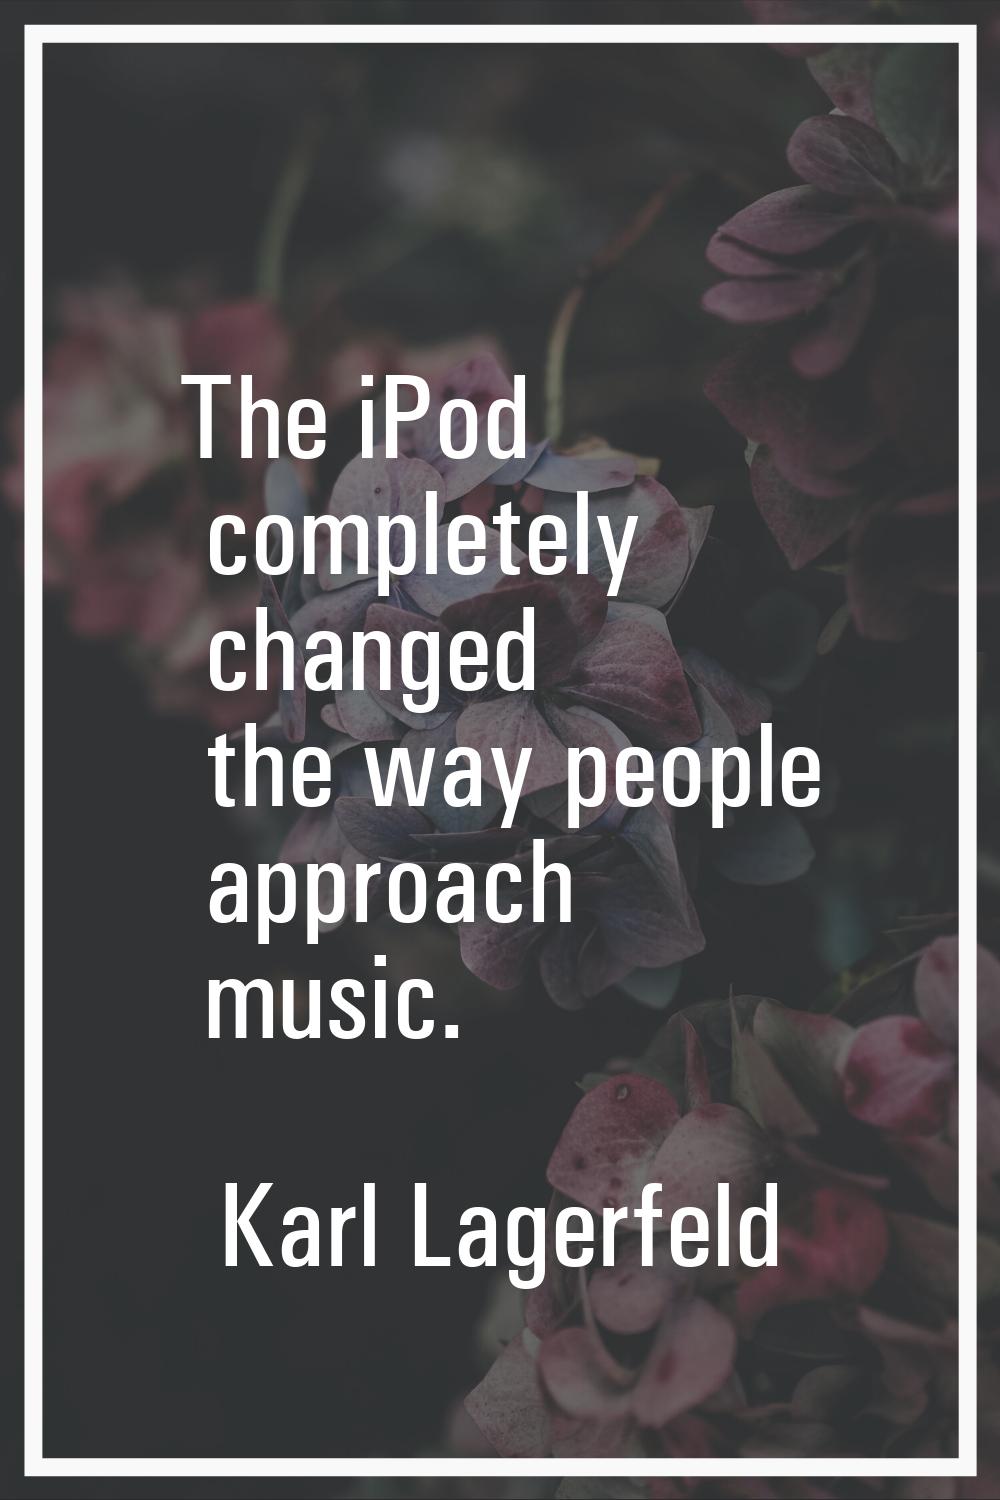 The iPod completely changed the way people approach music.